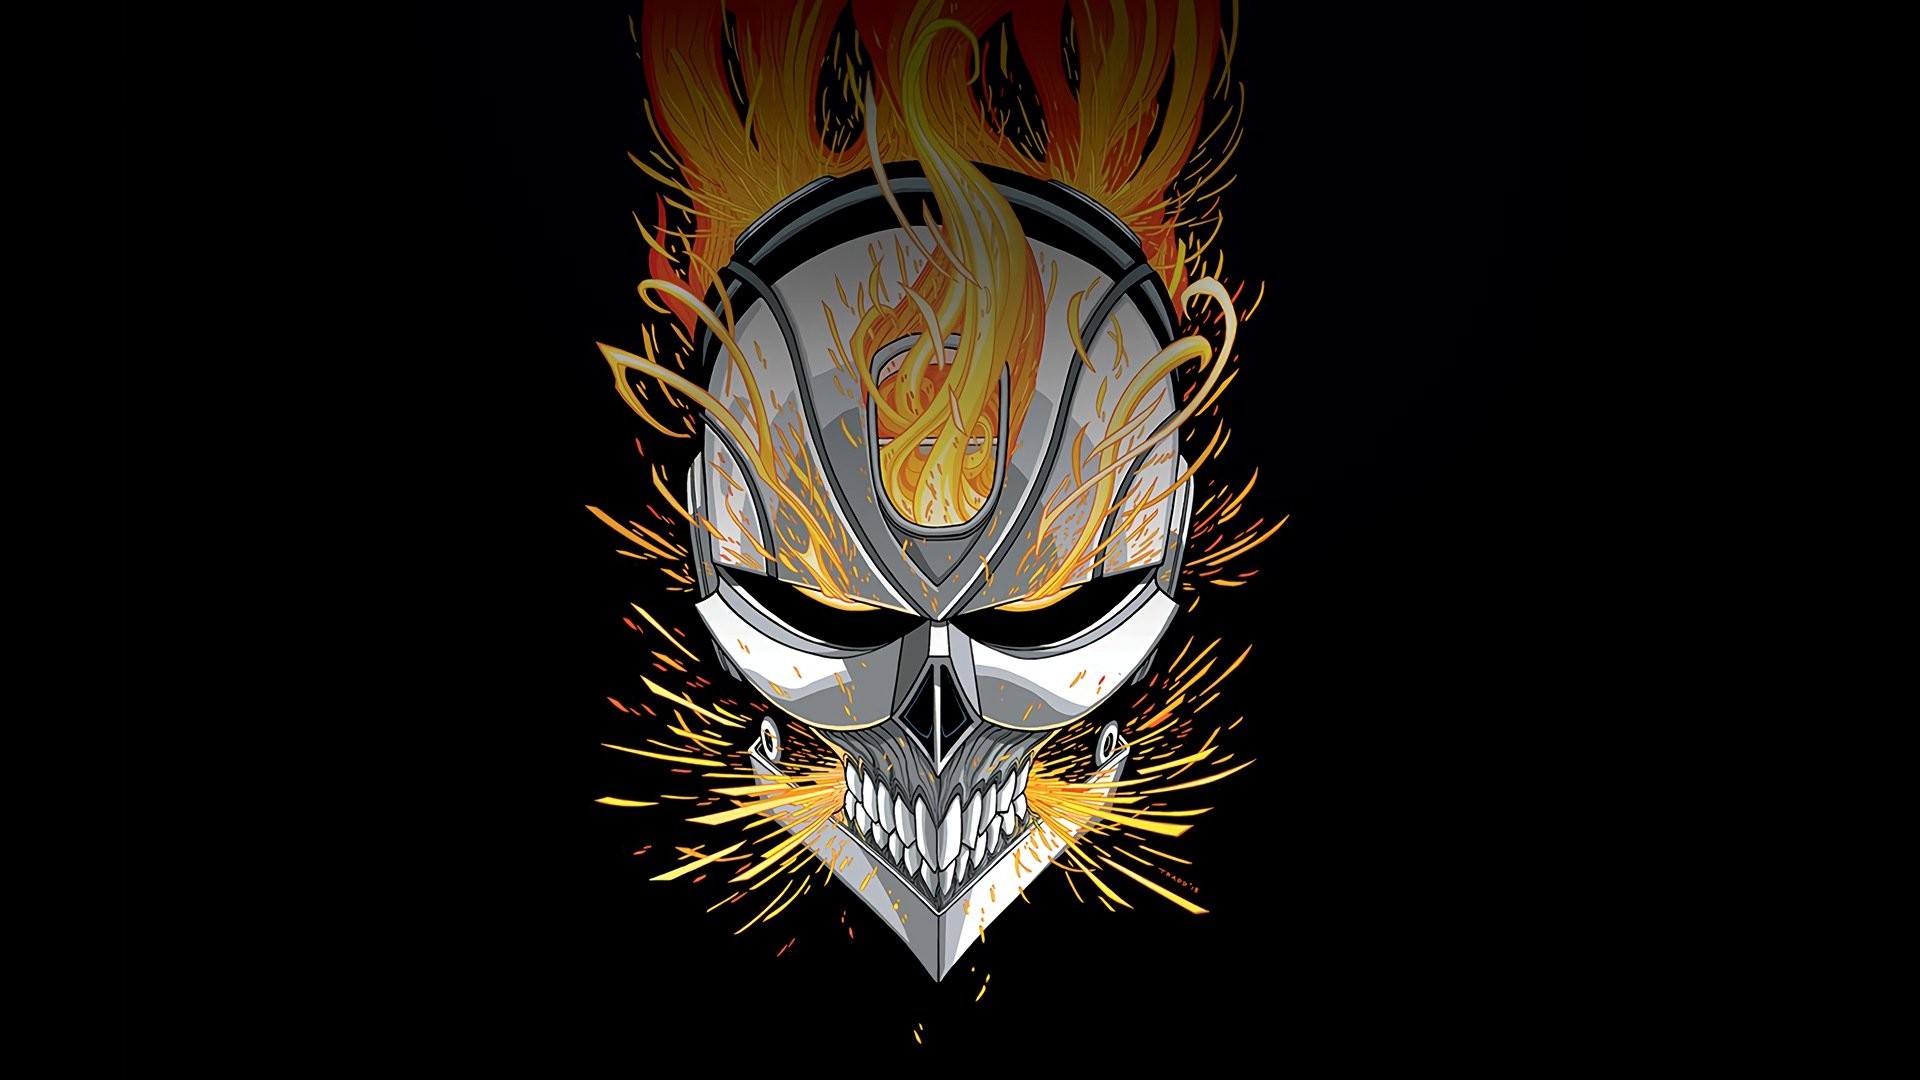 1920x1080 Marvel Comics, Ghost Rider, Robbie Reyes, Skull, Fire, Black background  Wallpapers HD / Desktop and Mobile Backgrounds